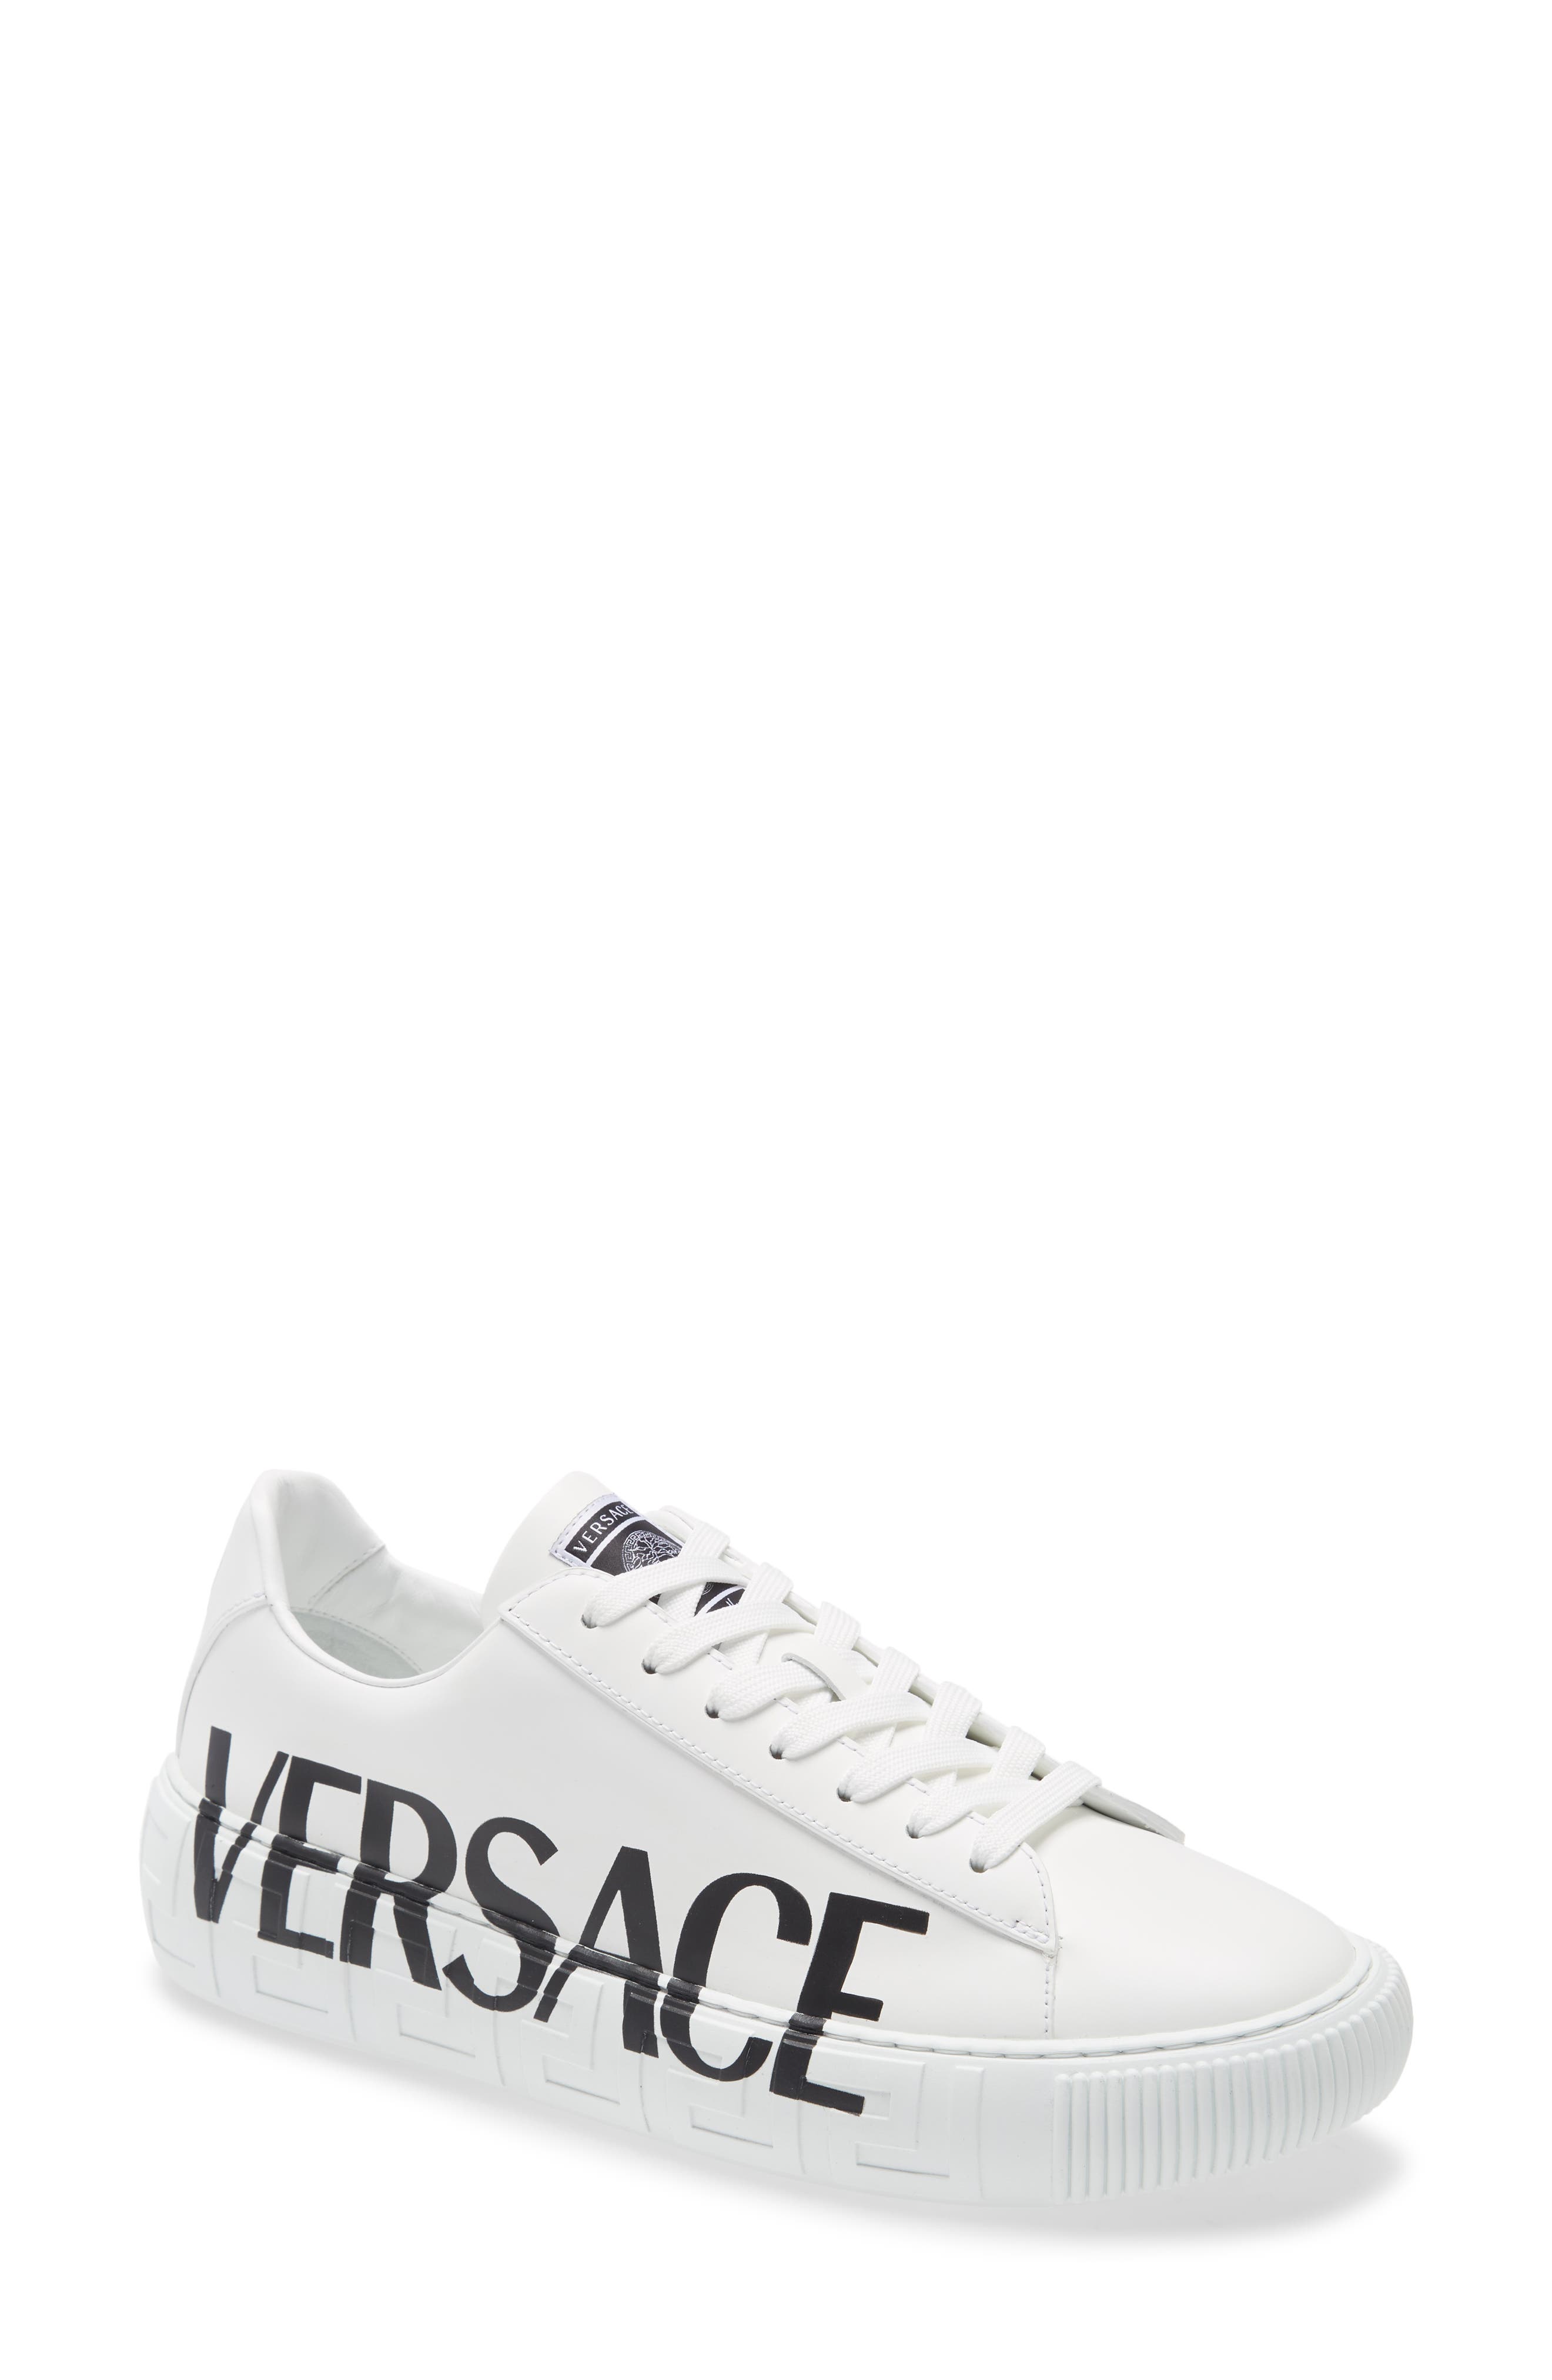 versace shoes on sale